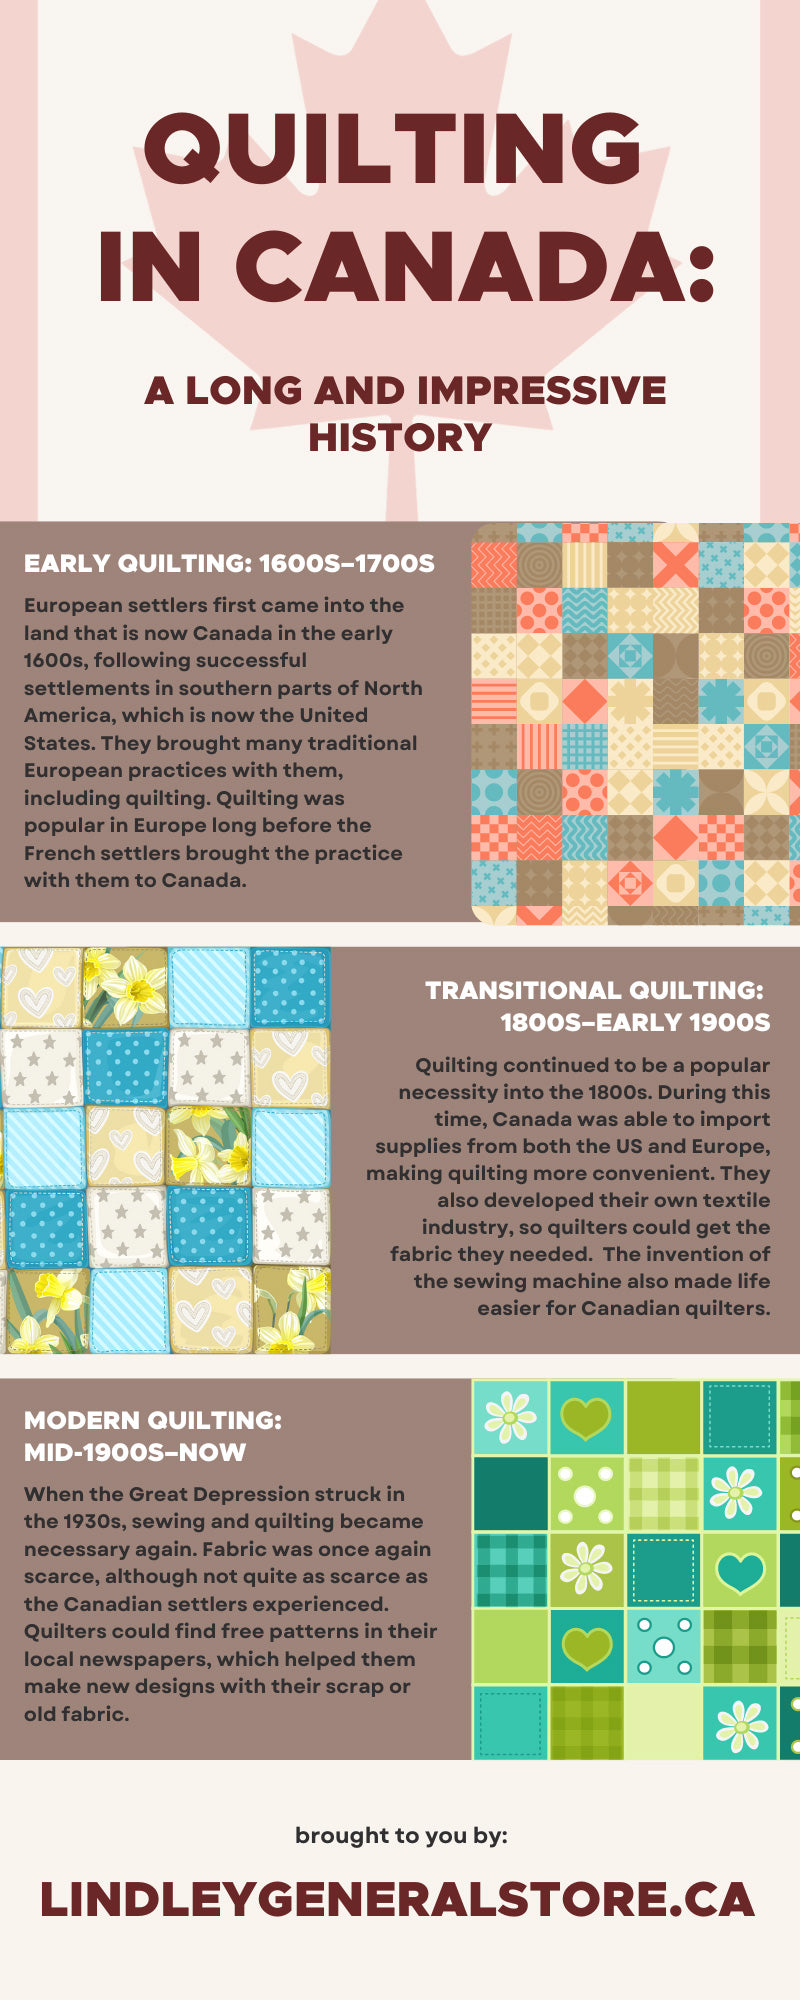 Quilting in Canada: A Long and Impressive History